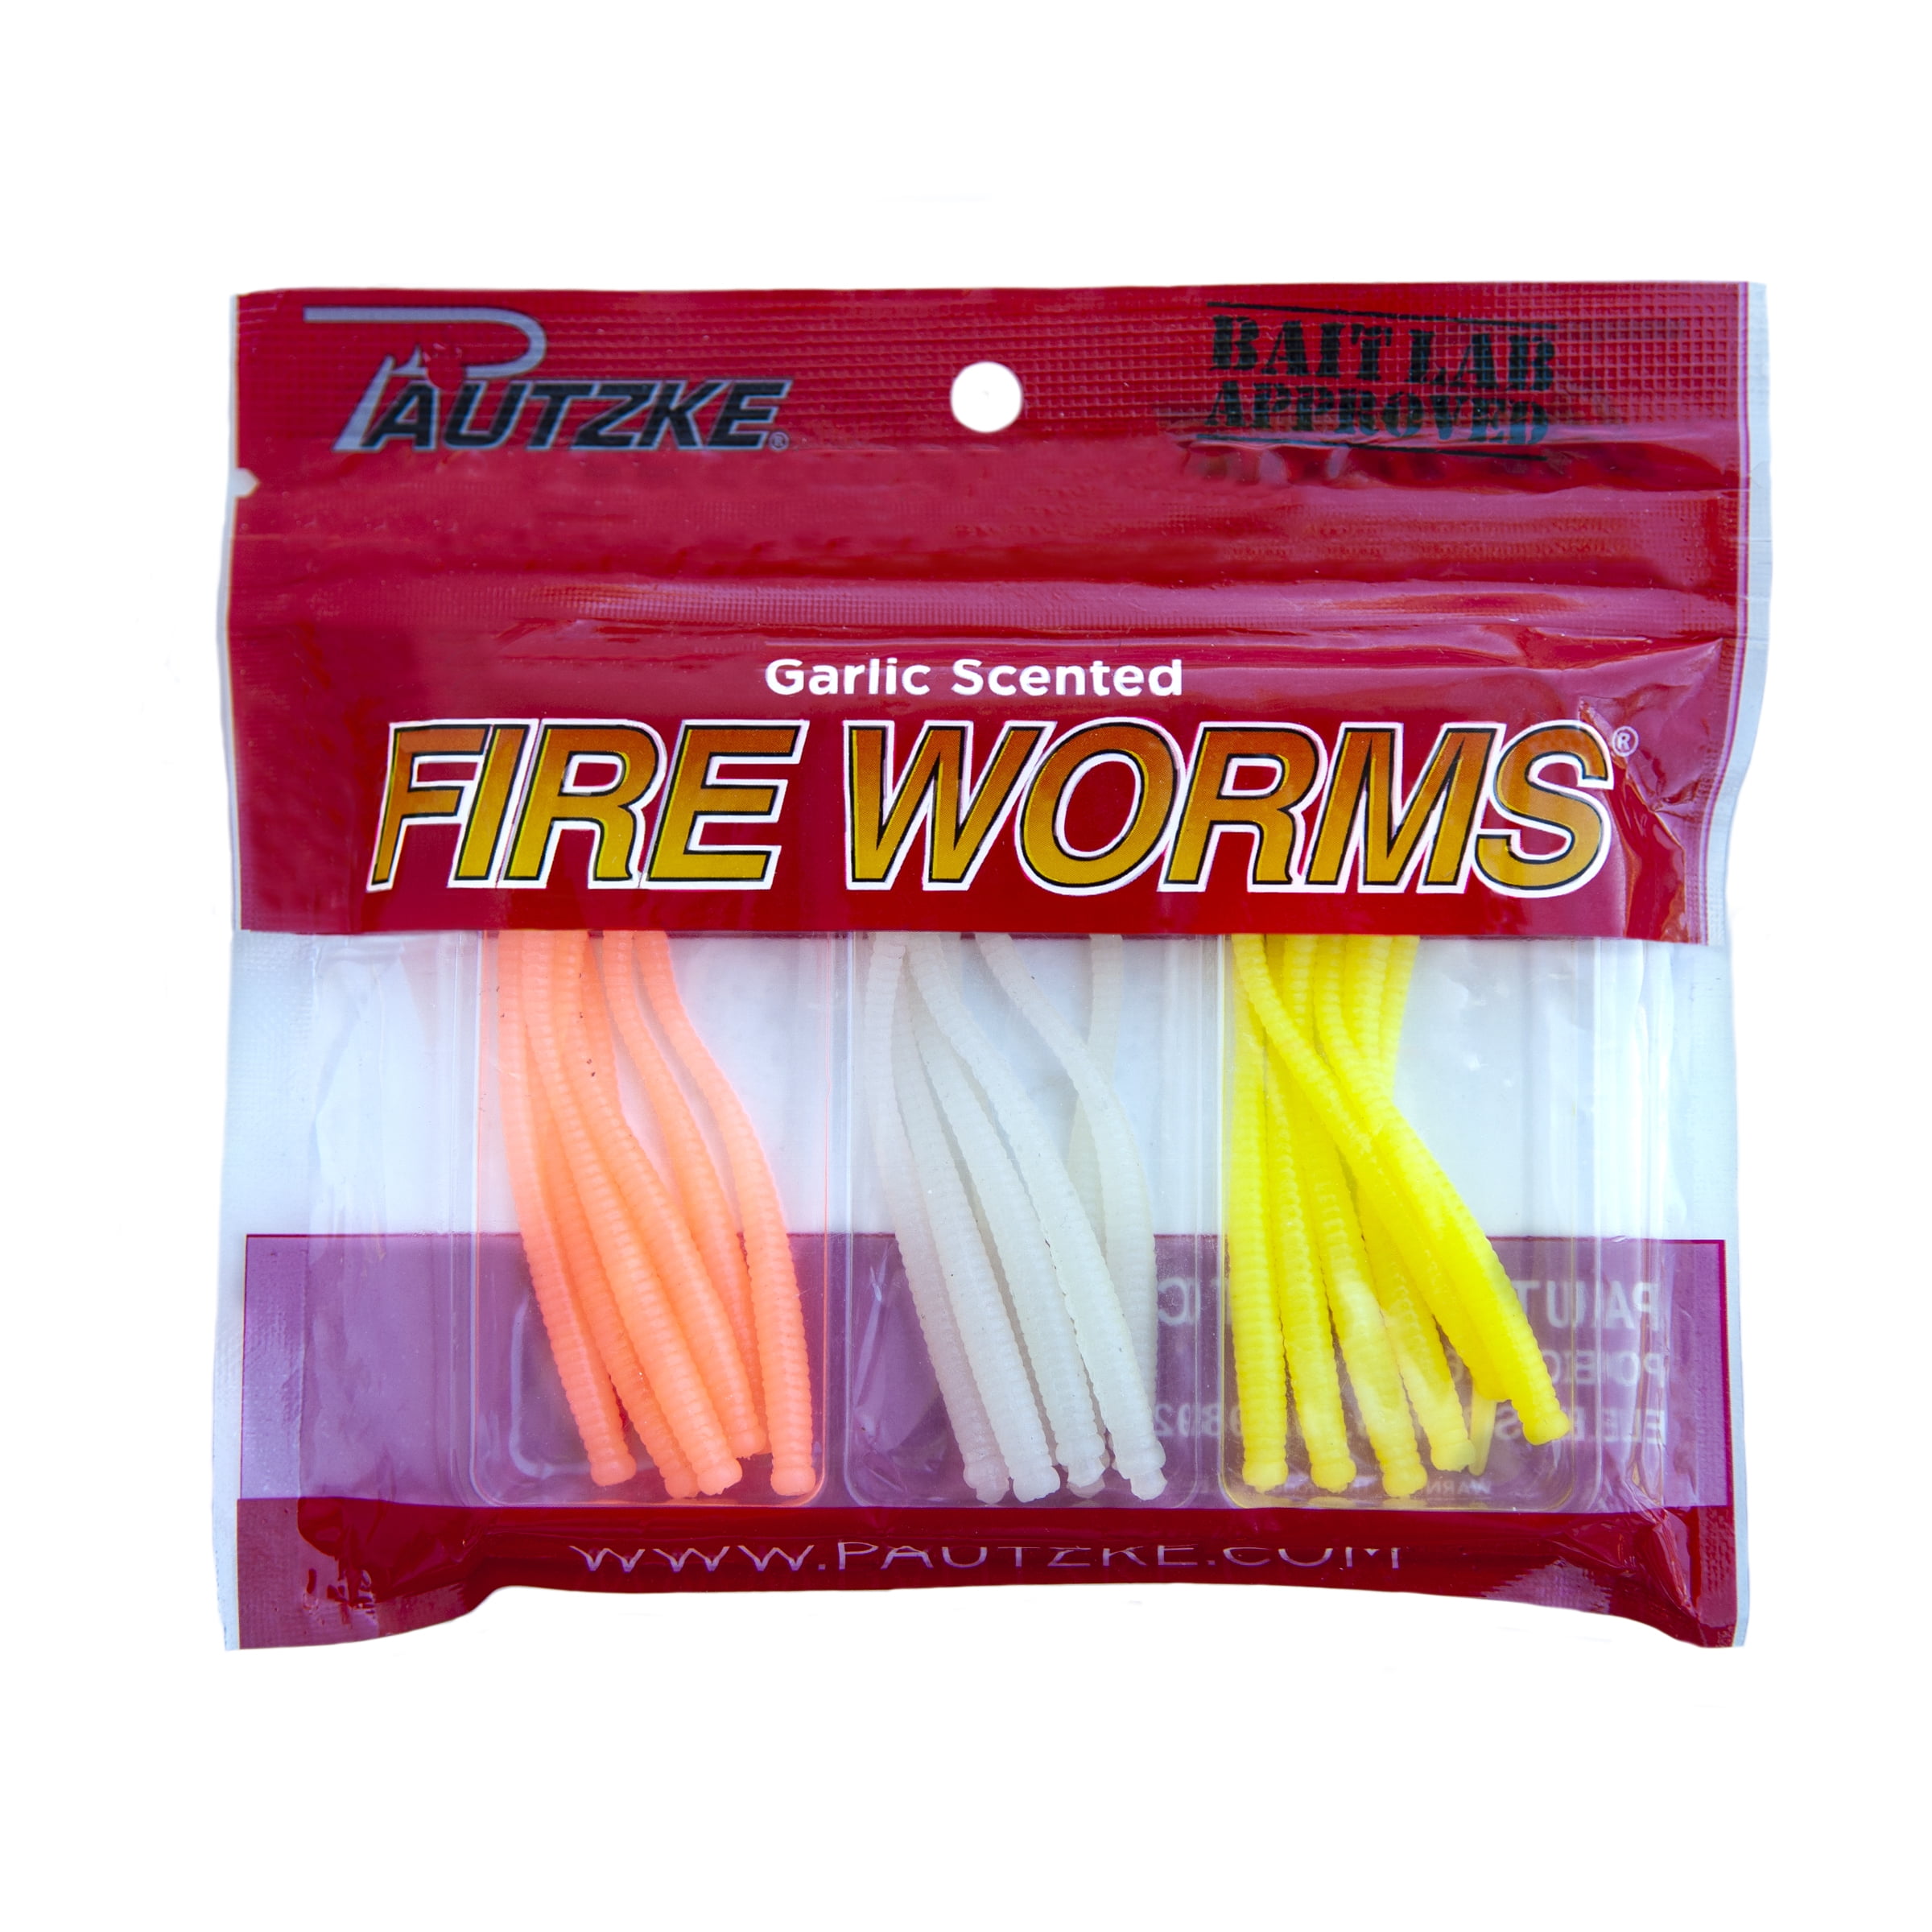 Pautzke Fire Worms Variety Pack - Peach, Yellow, Glow 